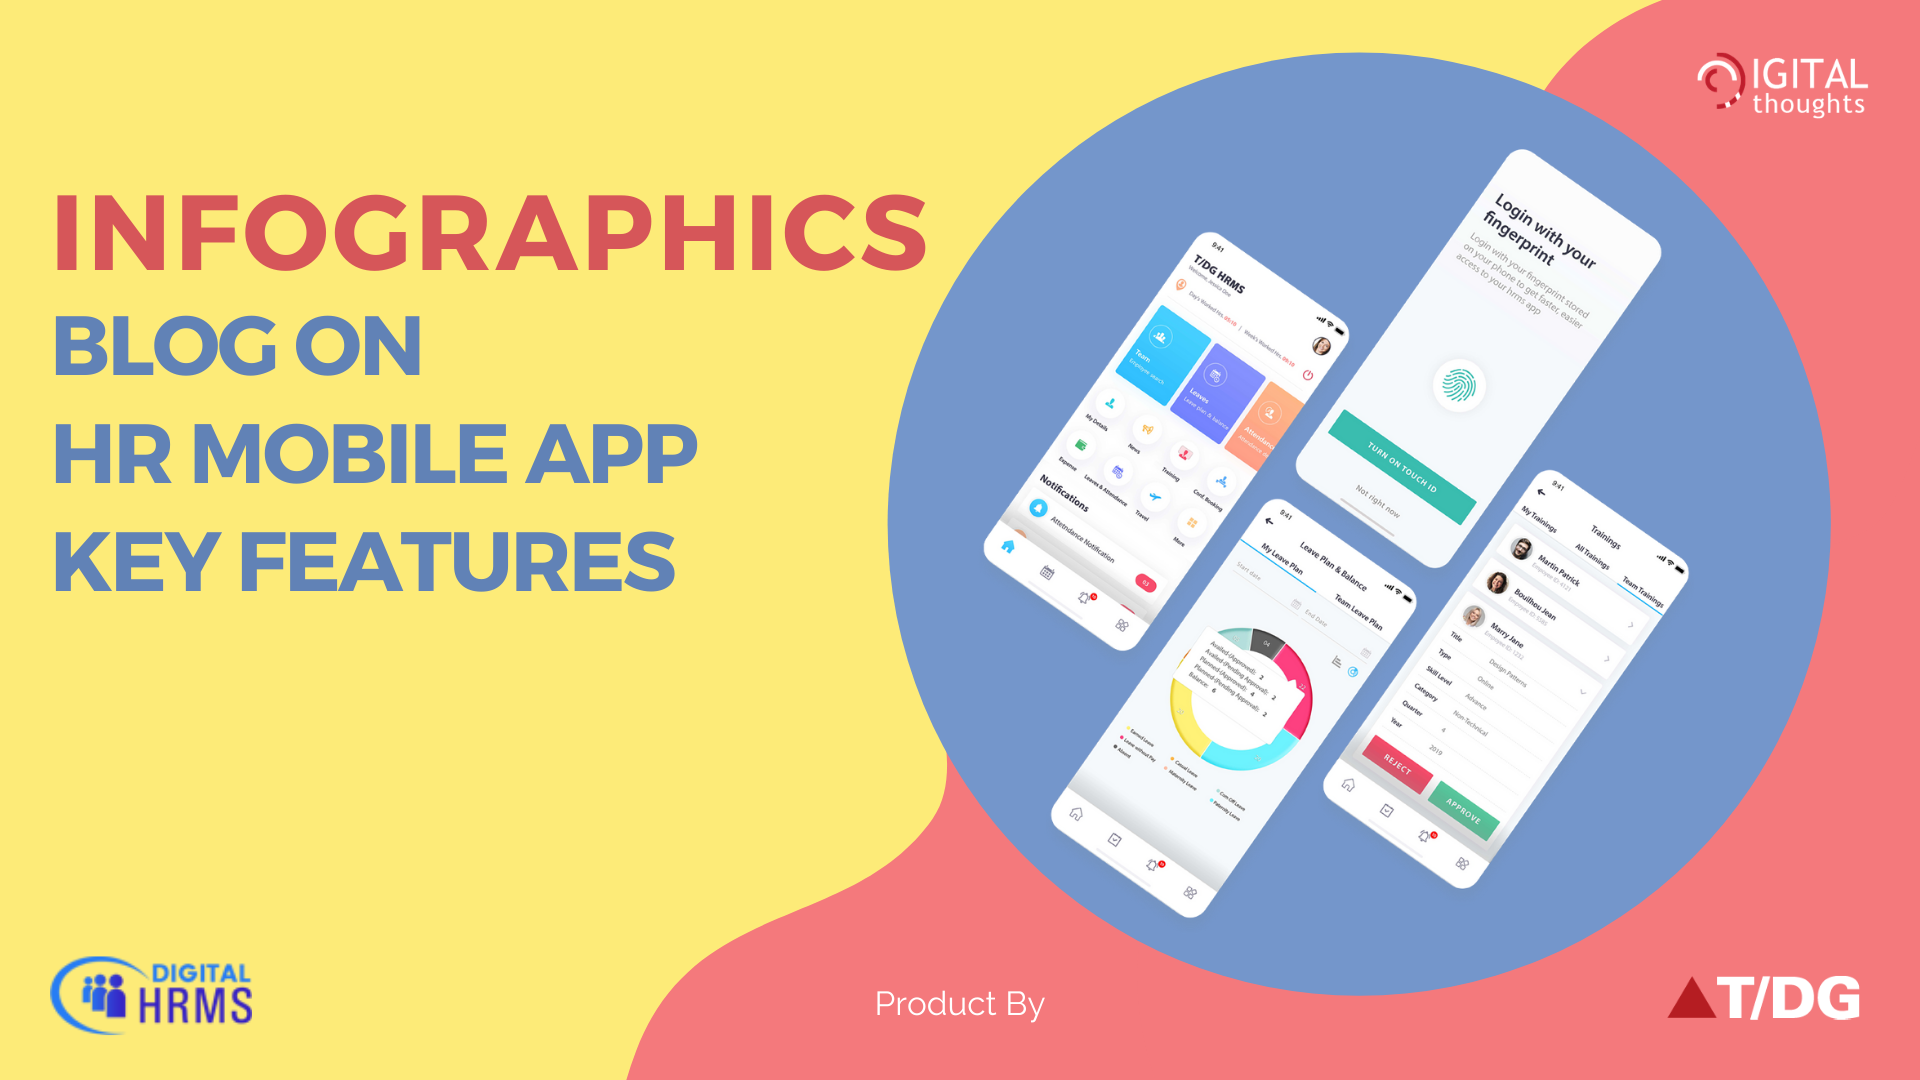 Infographics Blog on Key features of an HR Mobile App in 2021